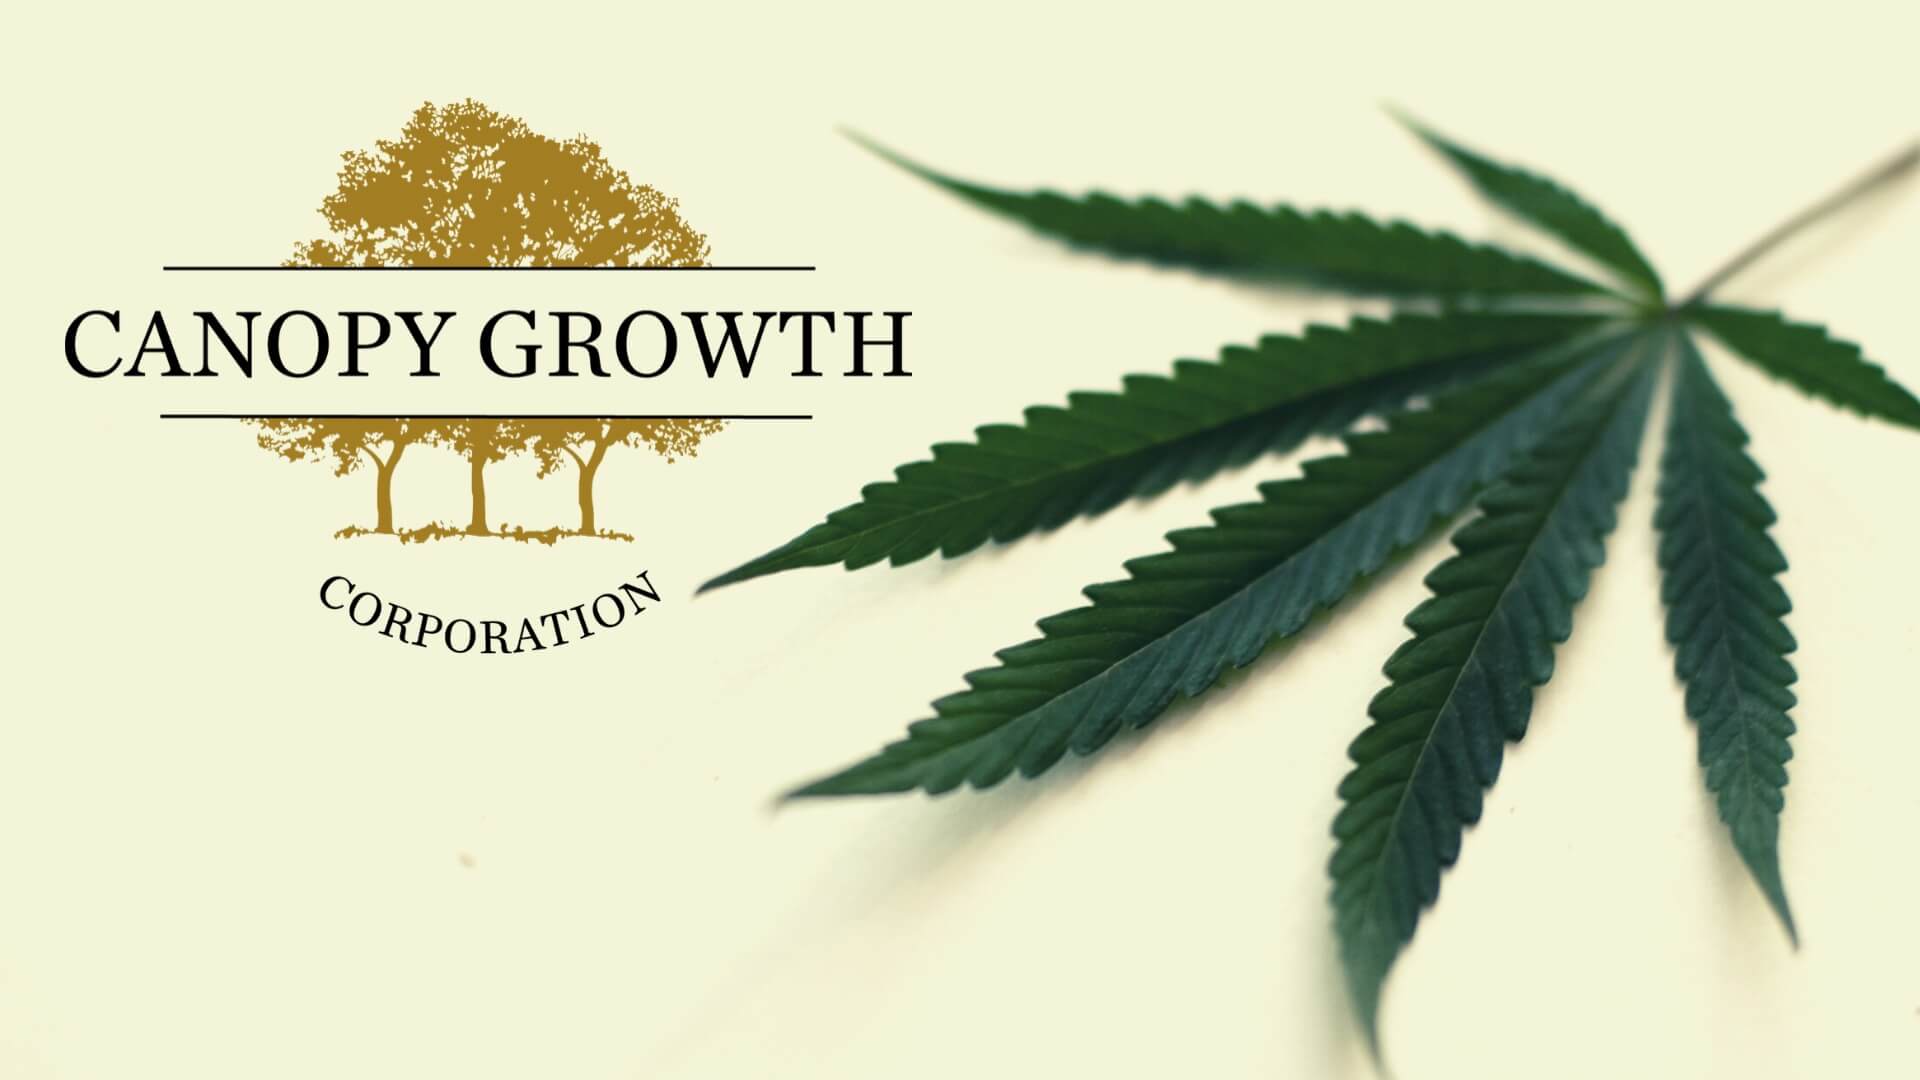 Canopy Growth Corporation begun producing cannabis-infused beverages